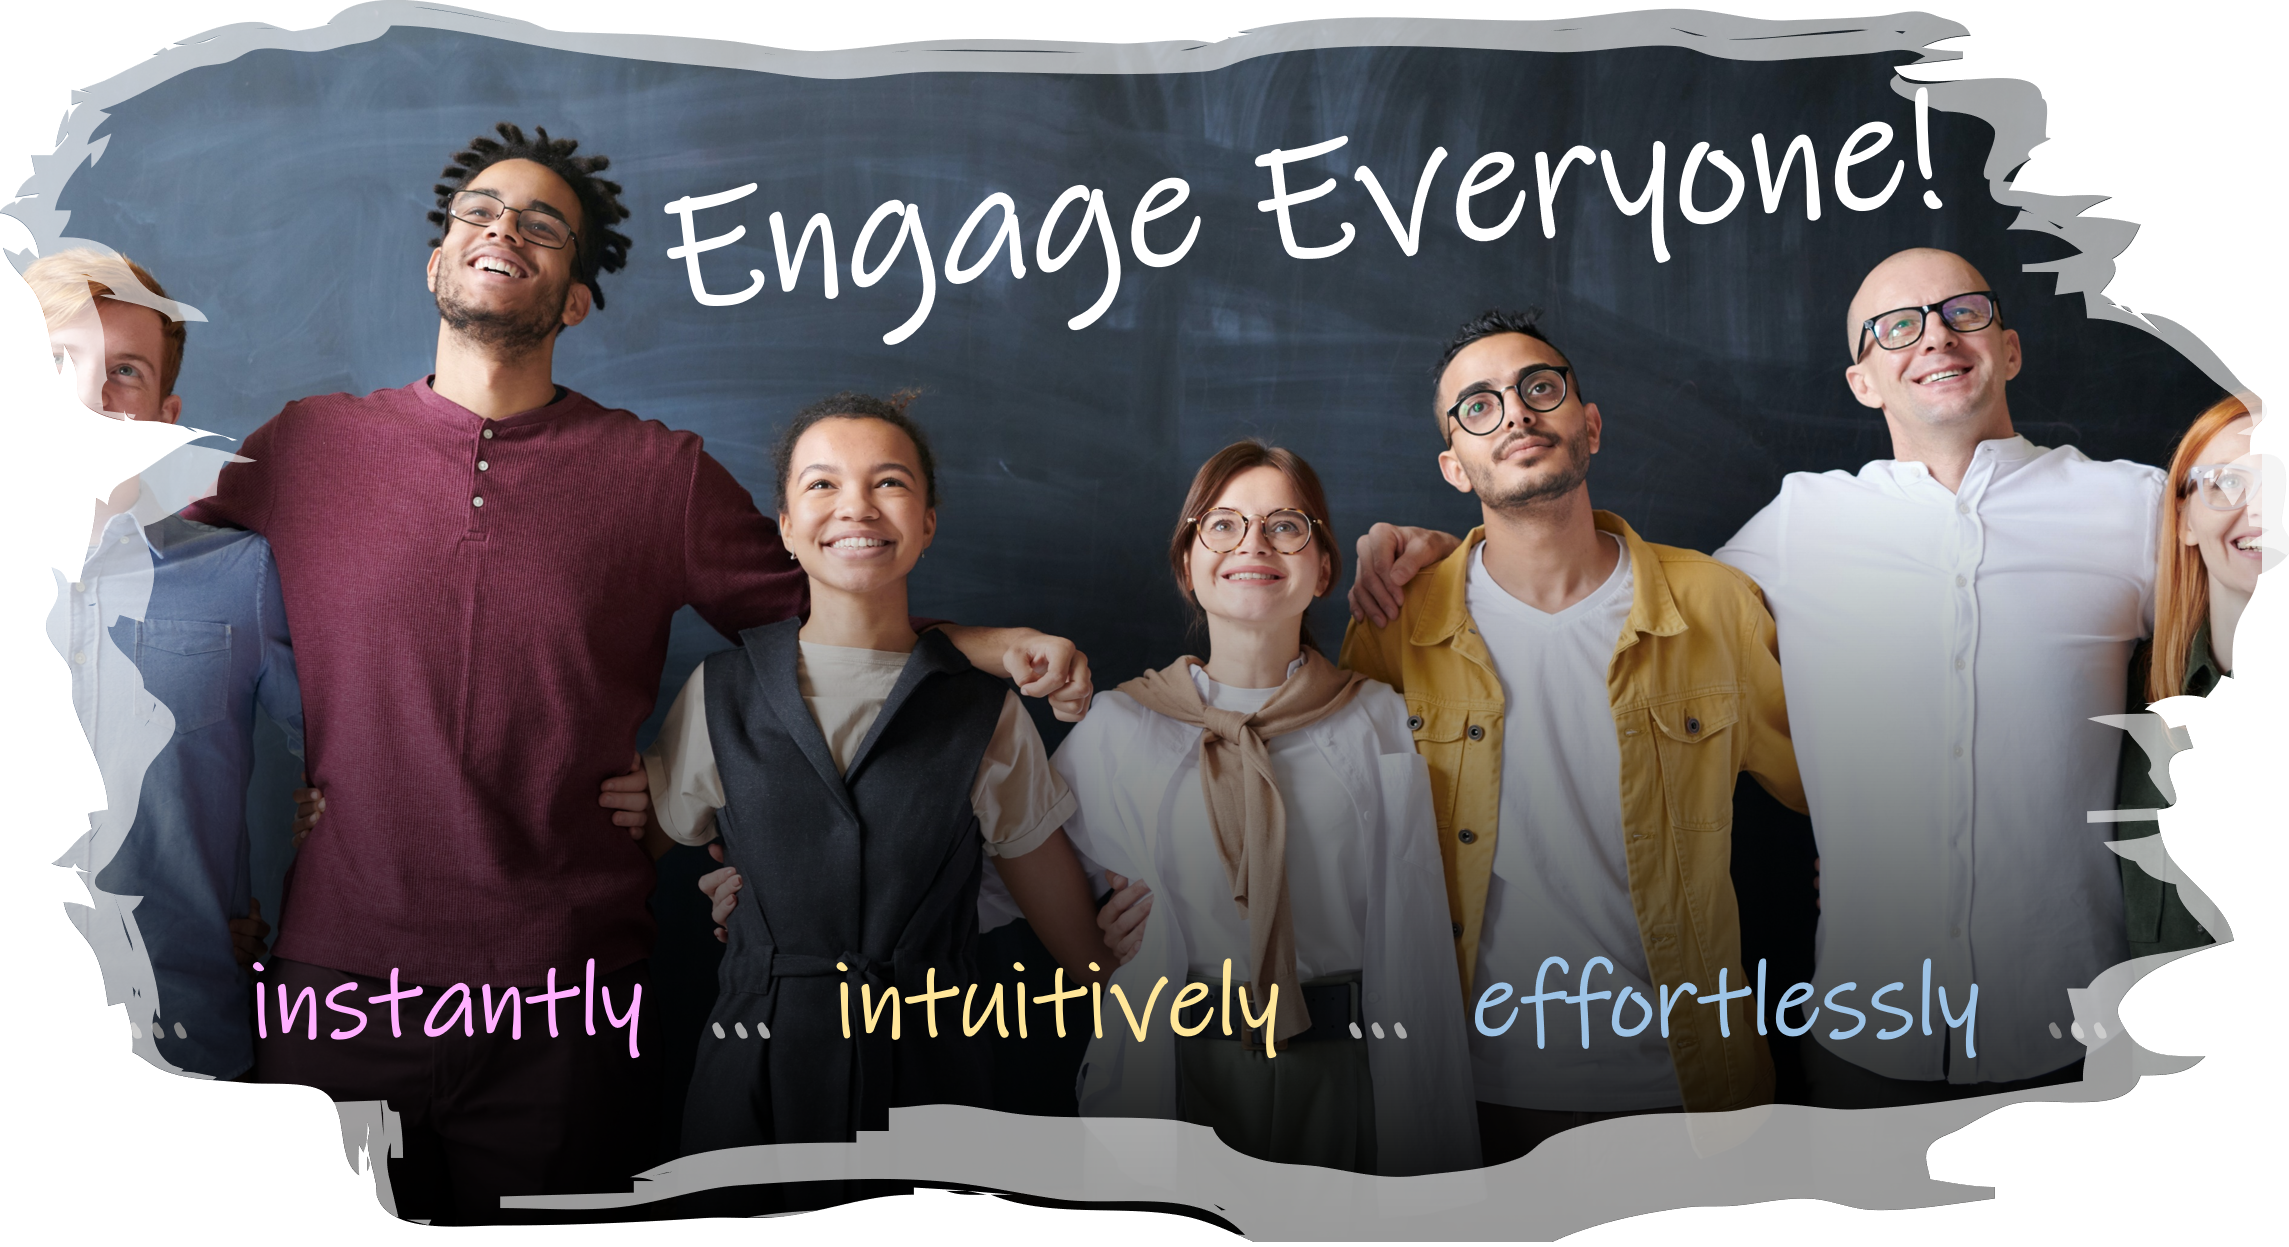 Engage Everyone:    Instantly ... Intuitively ... Effortlessly - A group of people engaged and looking positively forward